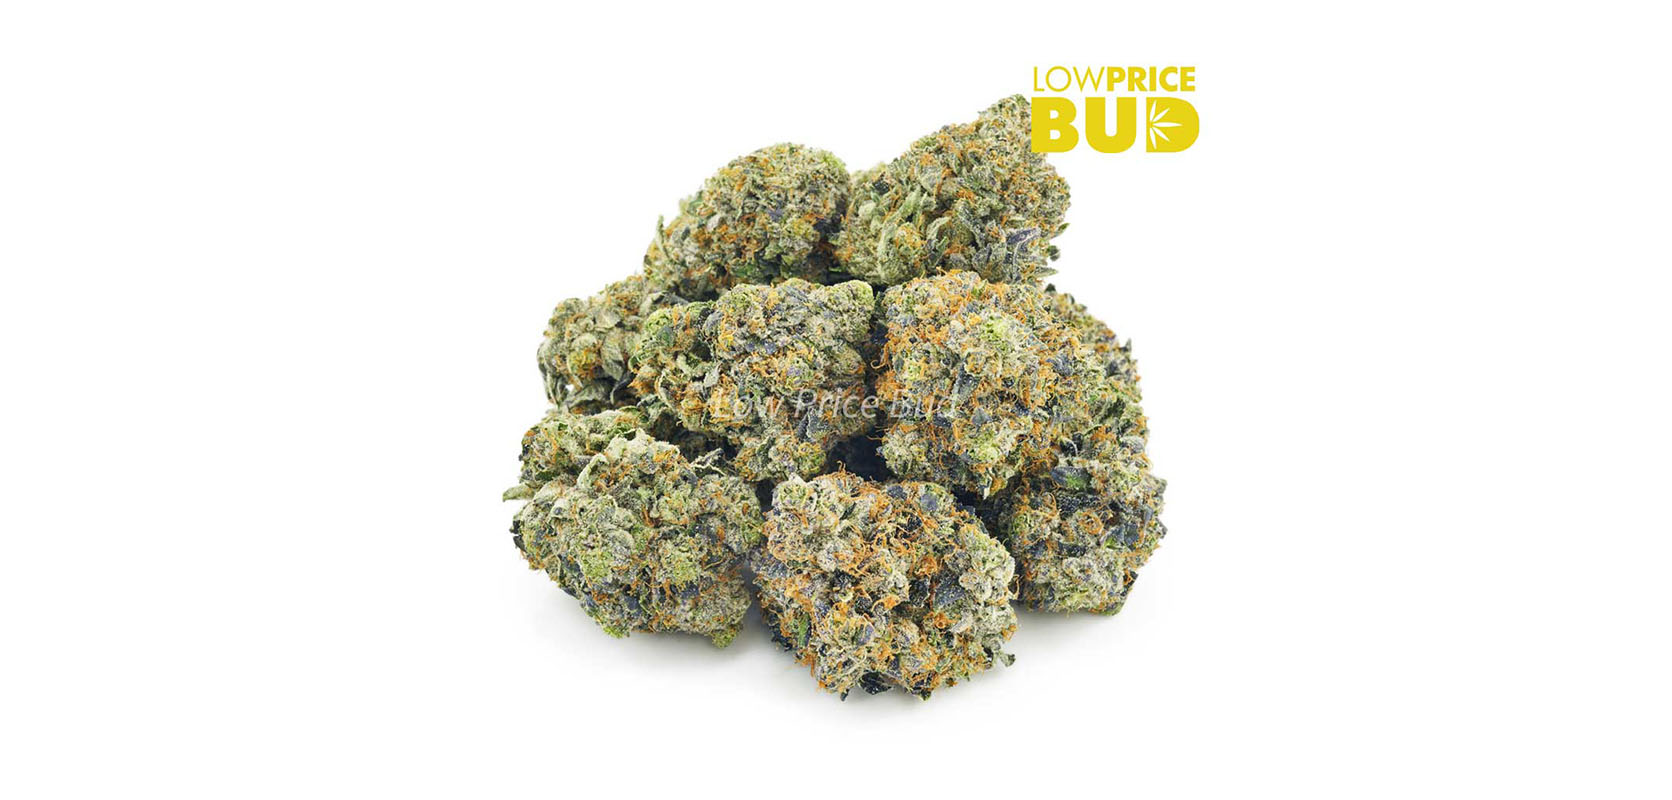 image of ice cream cake strain weed for sale from lowpricebud.co online dispensary for cheap weed in canada. buy pot online.